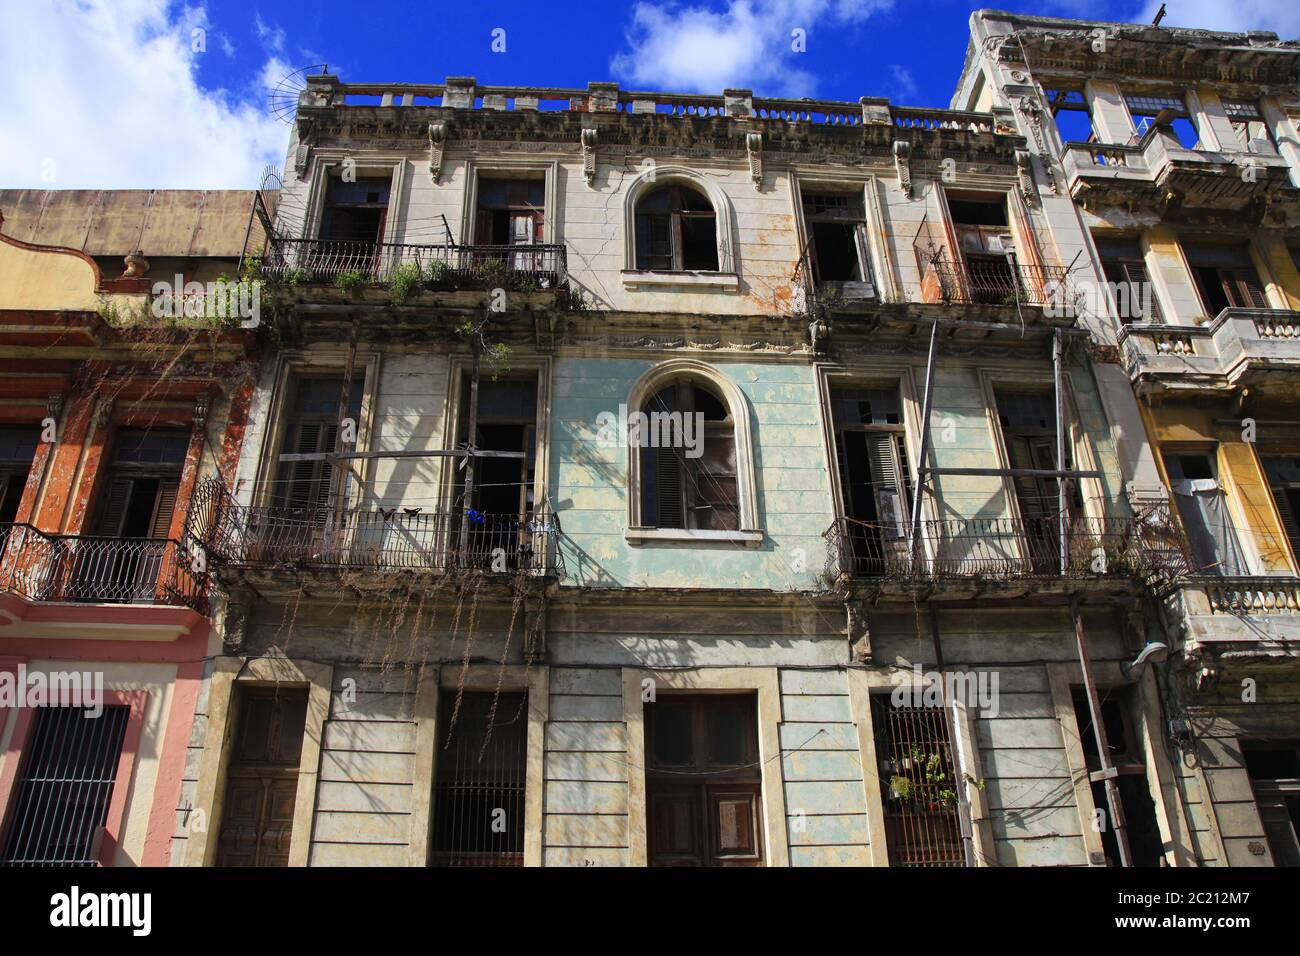 Facade of an old residential building with balconies in Havana, Cuba Stock Photo